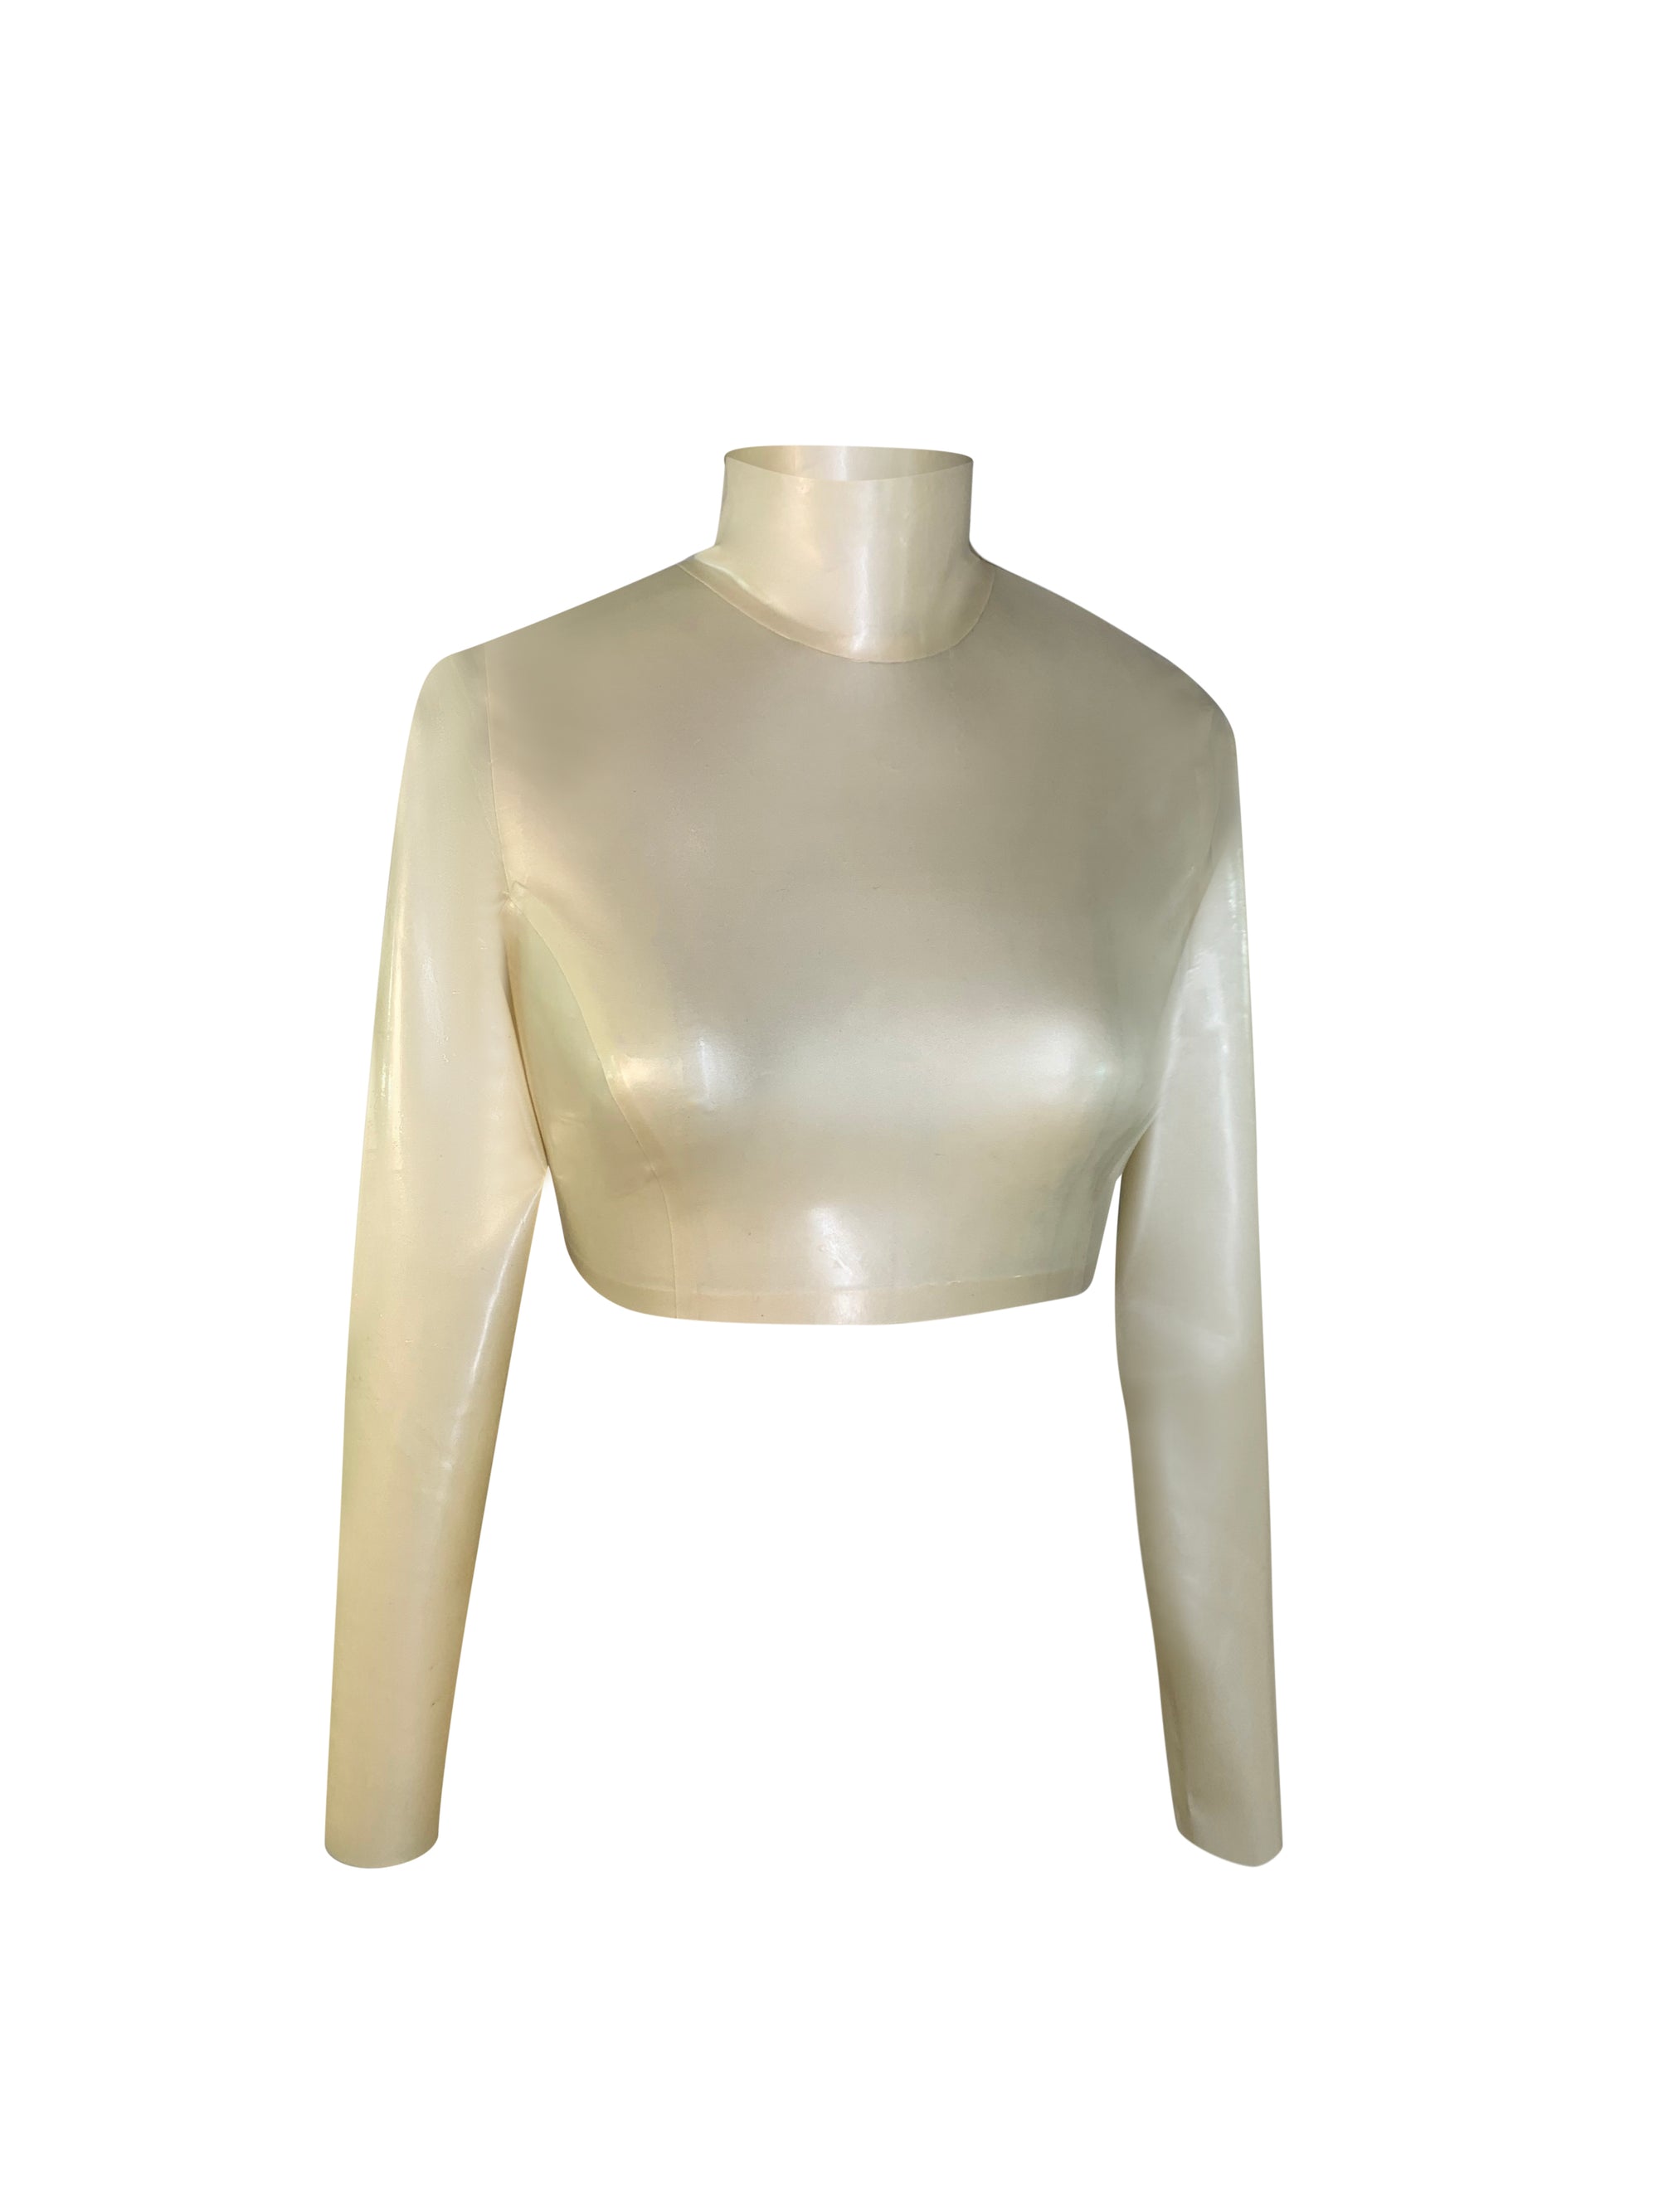 Pearl White Print Simple Crop READY TO SHIP Small / Pearl White  - Vex Inc. | Latex Clothing